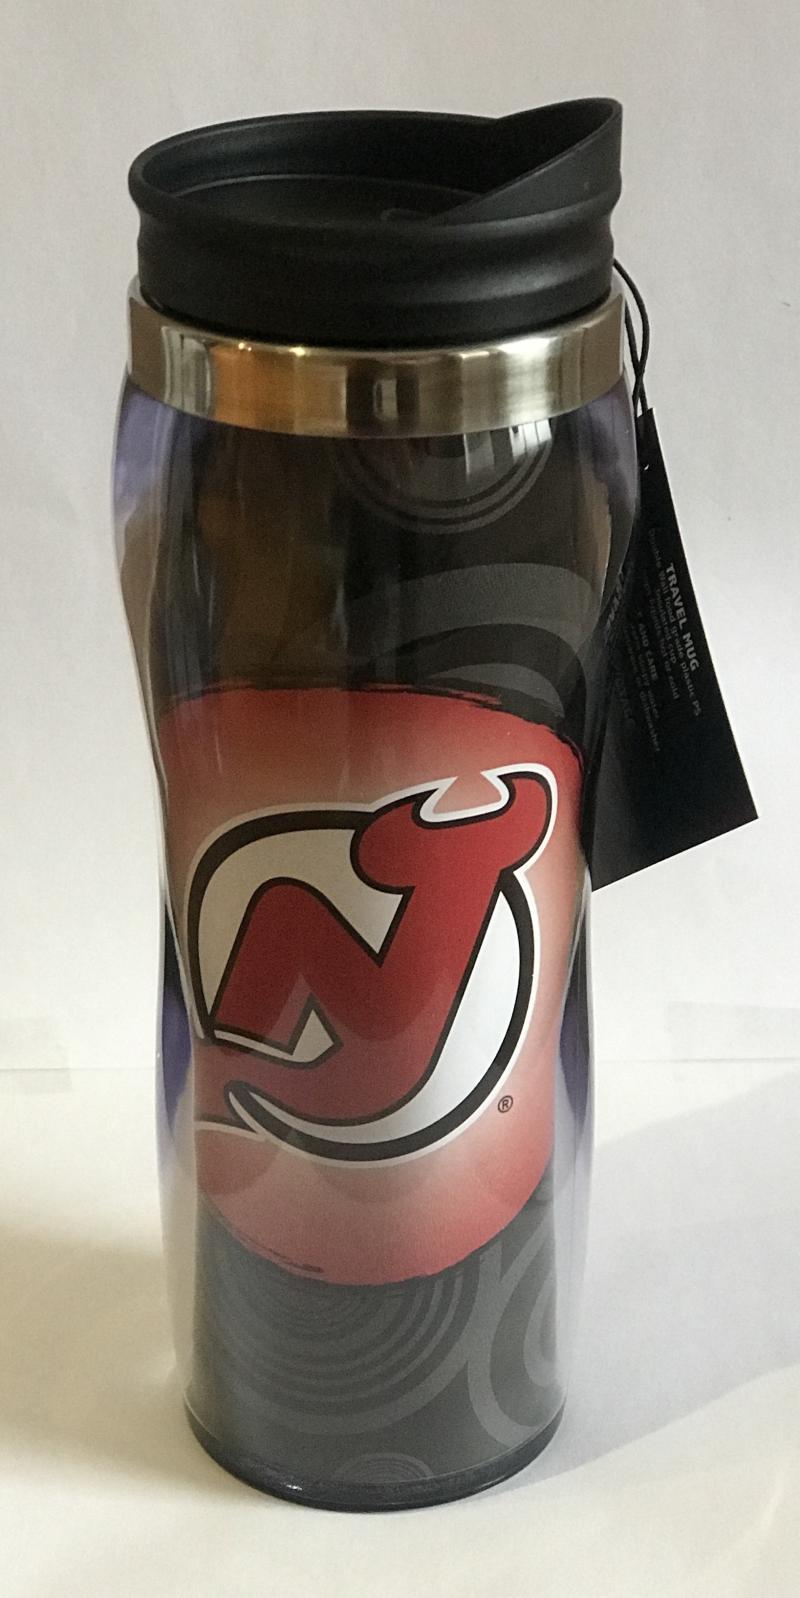 New Jersey Devils 14oz Insulated Tumbler - Keep Liquids Hot/Cold Image 1